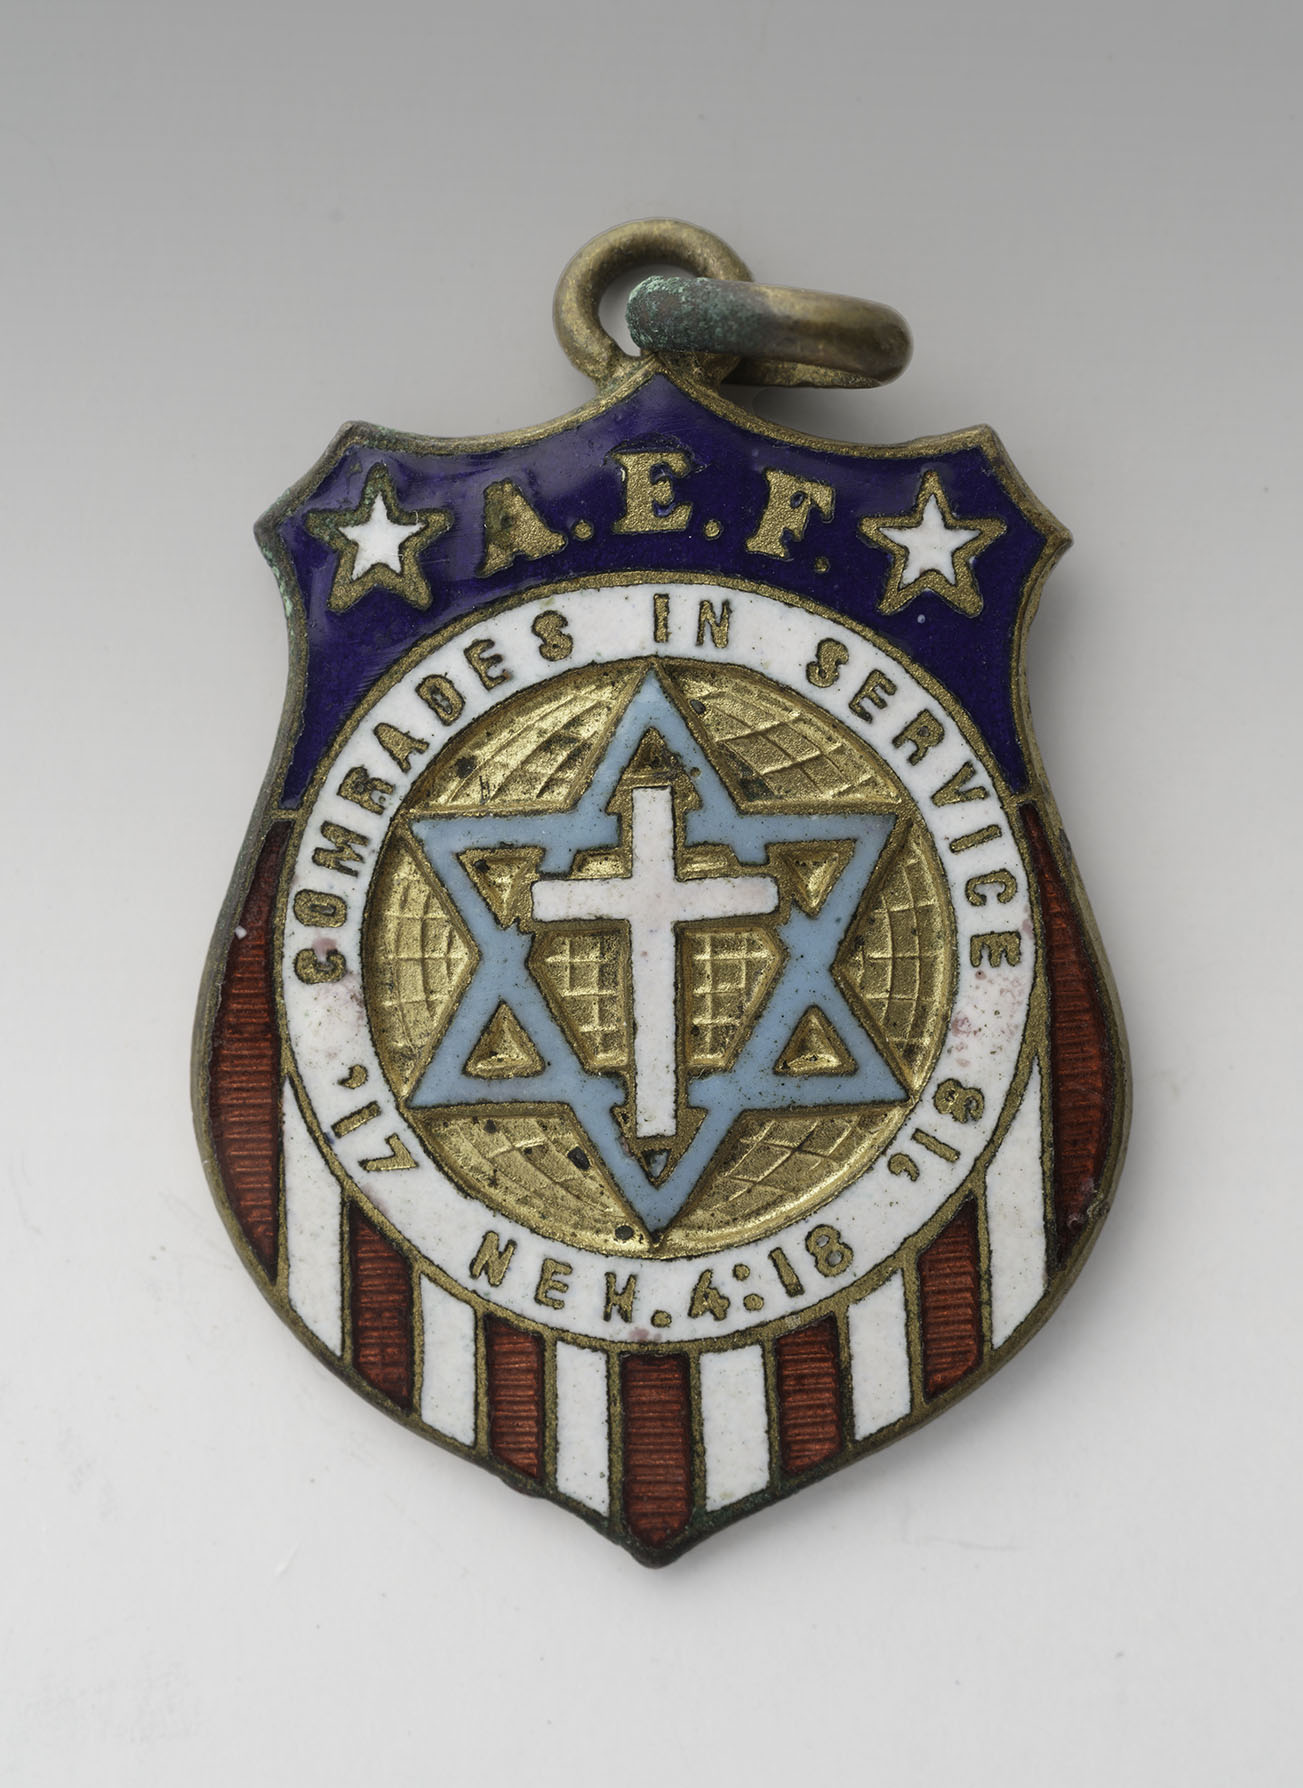 Modern photograph of a small charm shaped like a shield in the colors of the U.S. flag. In the center a cross is inside a star of David. Text engraved around the cross and star: "Comrades in Service / '17 '18 /  Neh. 4:18"